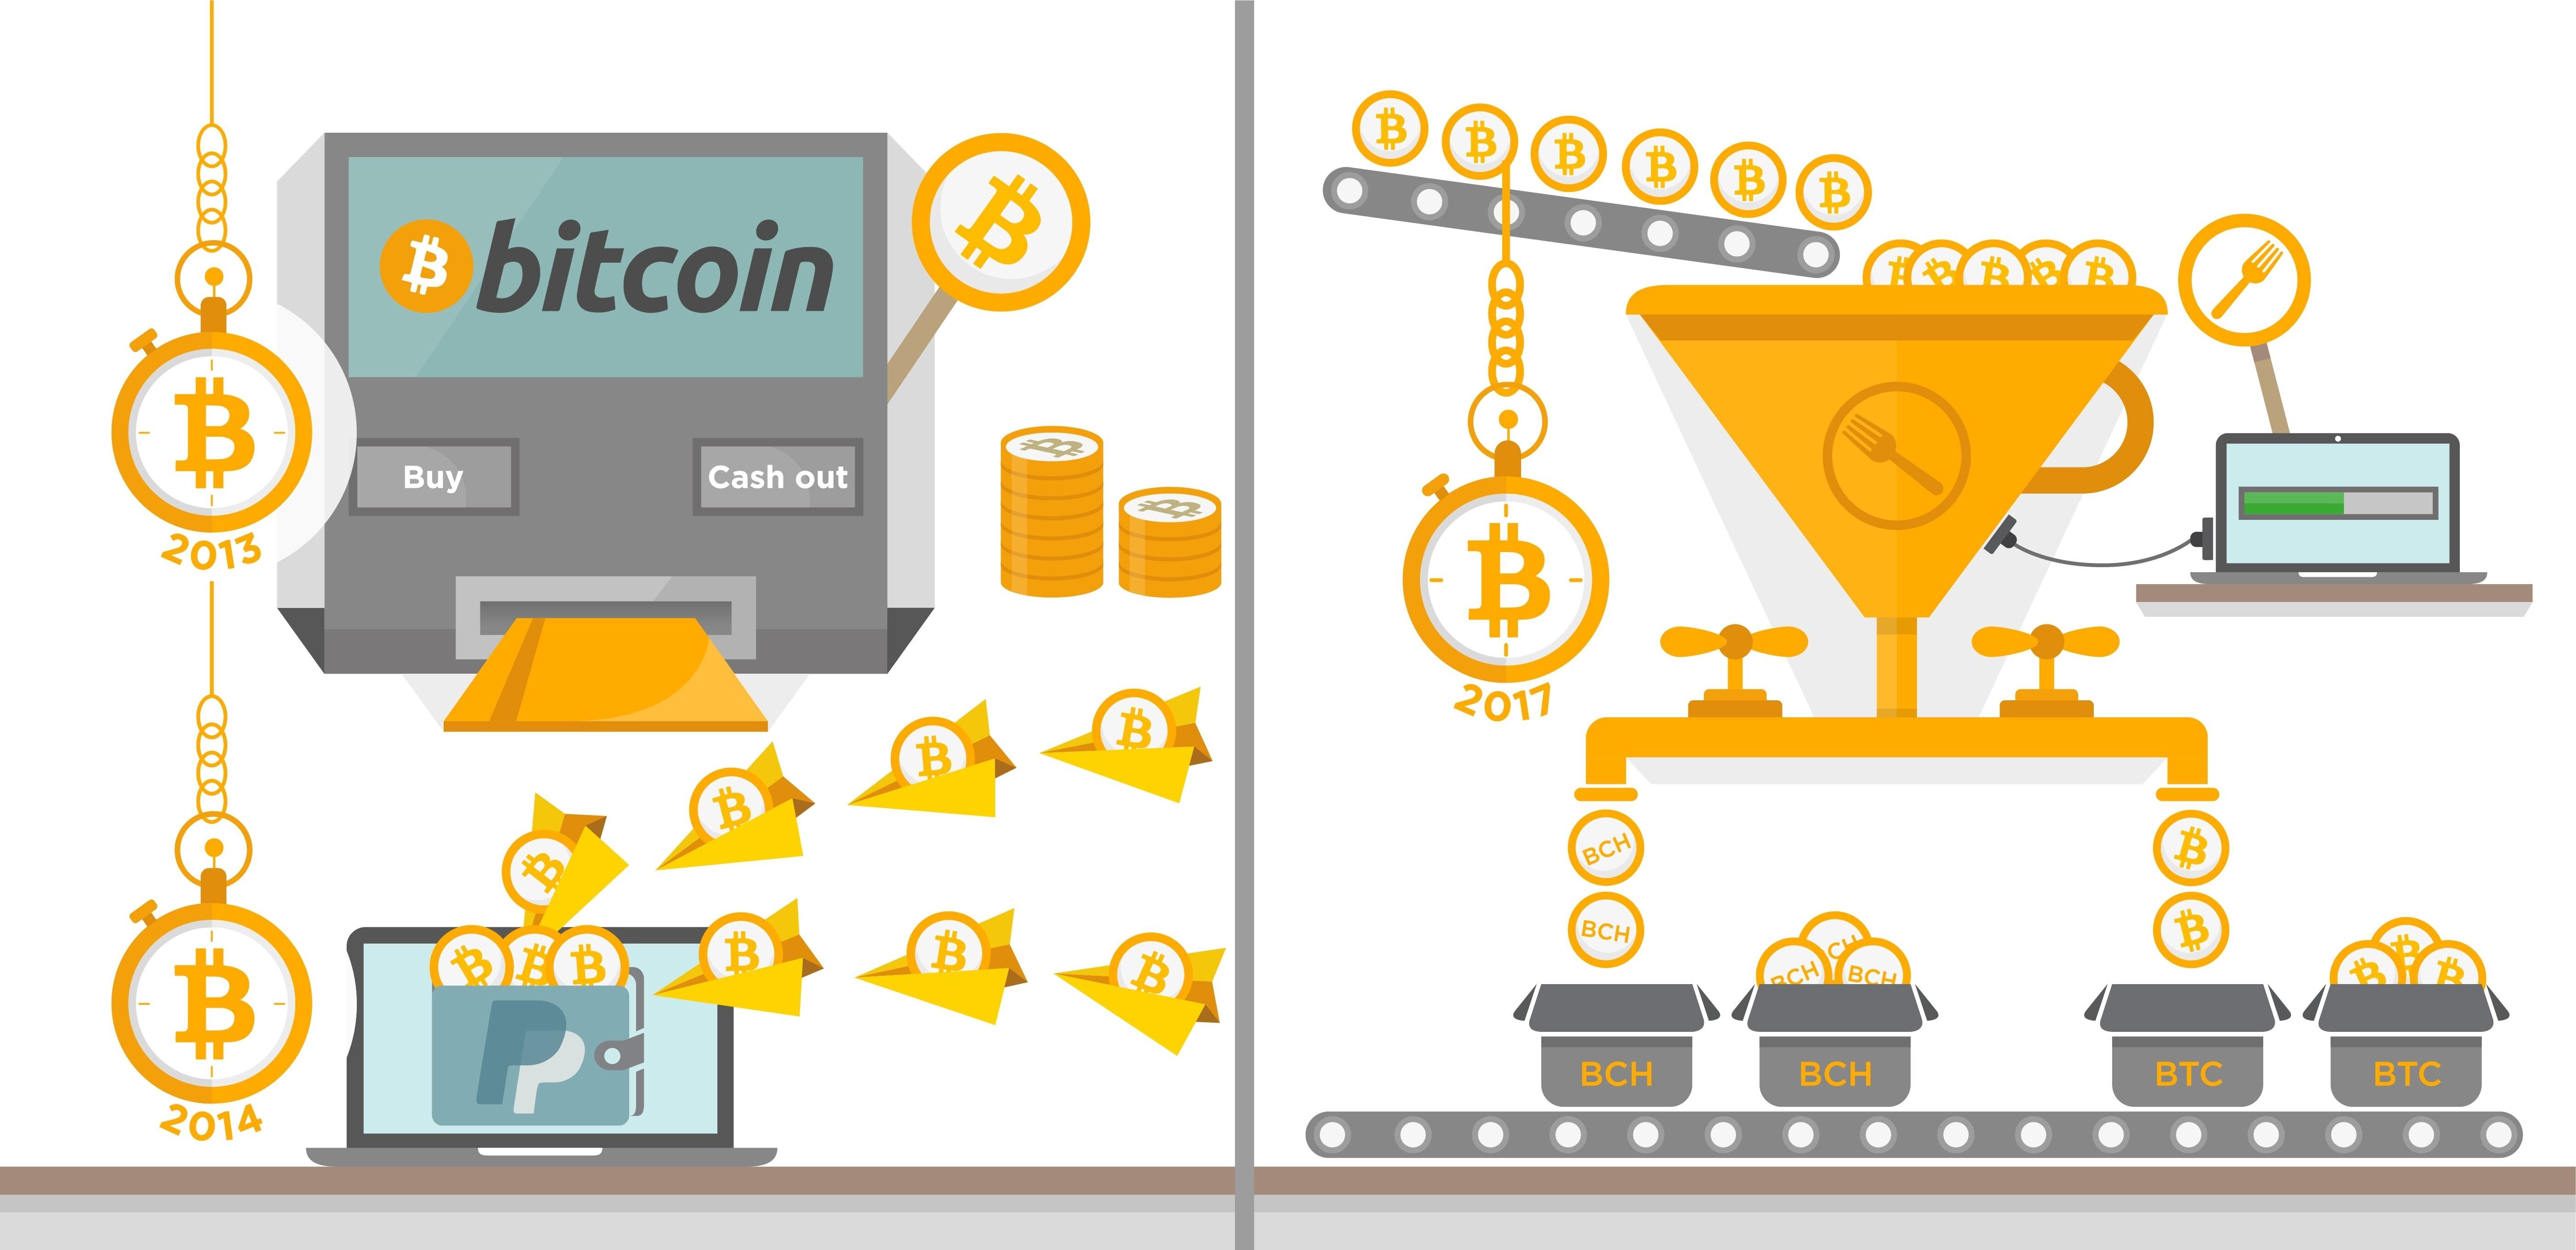 An infographic banner Bitcoin illustrations showing its progress over the years